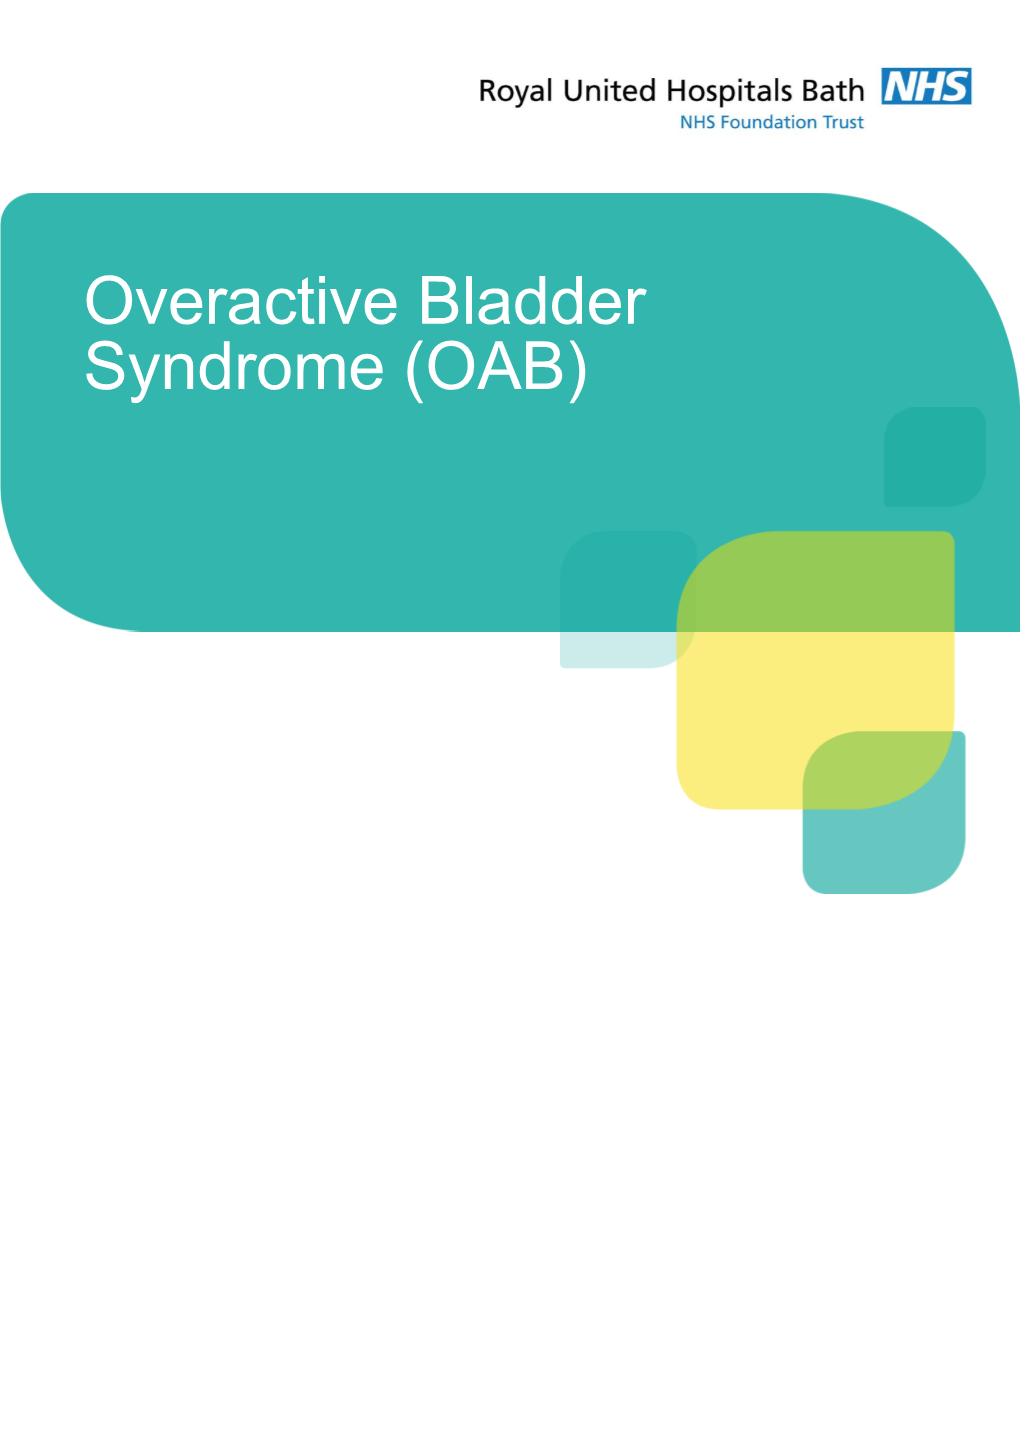 Overactive Bladder Syndrome (OAB)